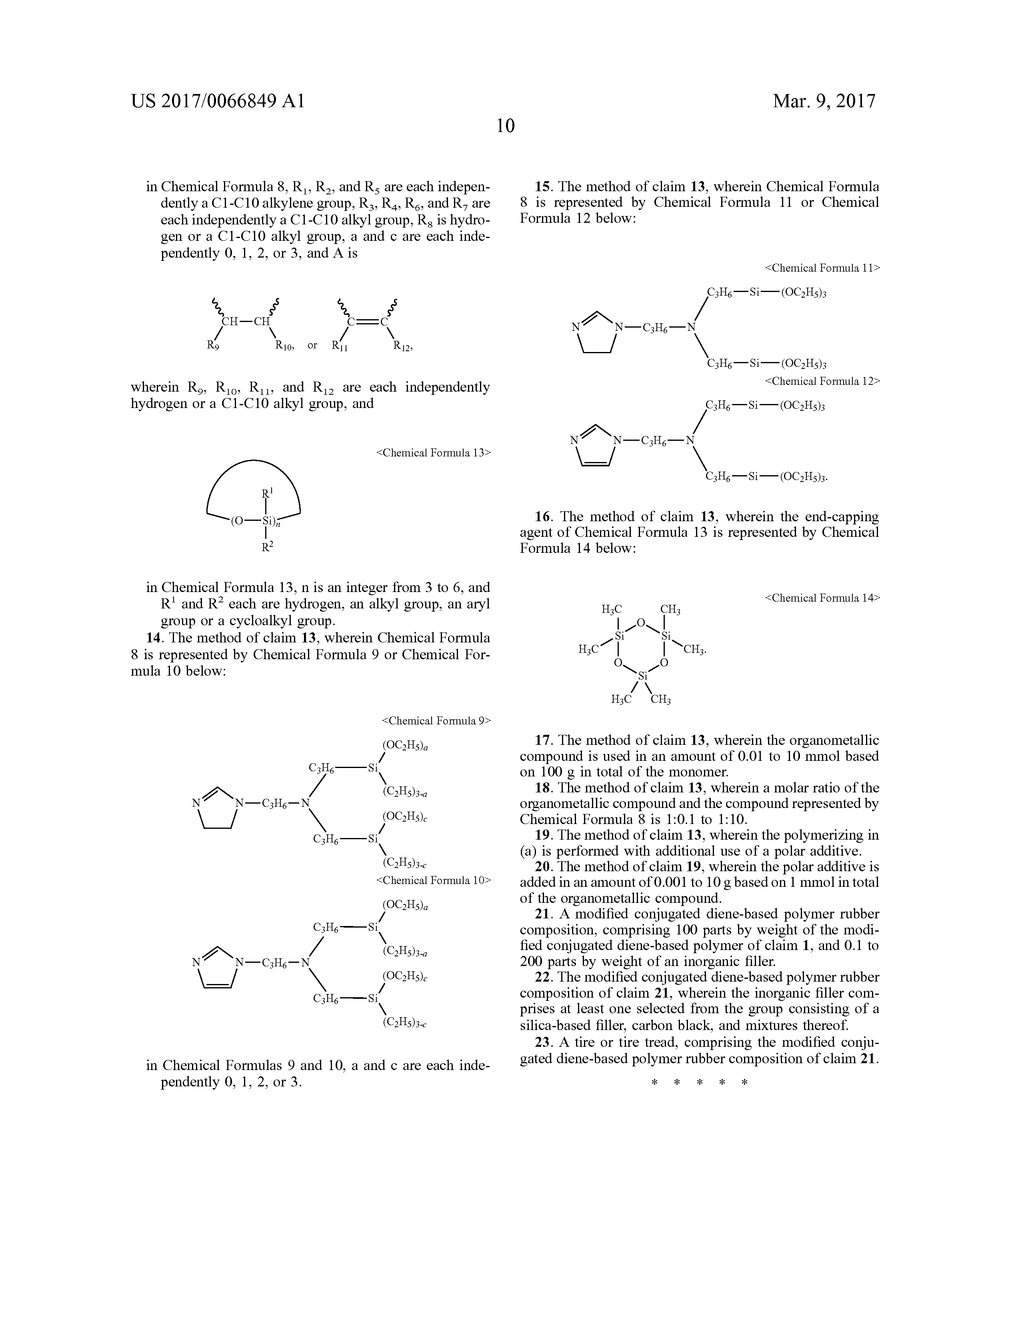 END-FUNCTIONAL CONJUGATED DIENE-BASED POLYMER AND METHOD OF PREPARING SAME - diagram, schematic, and image 11